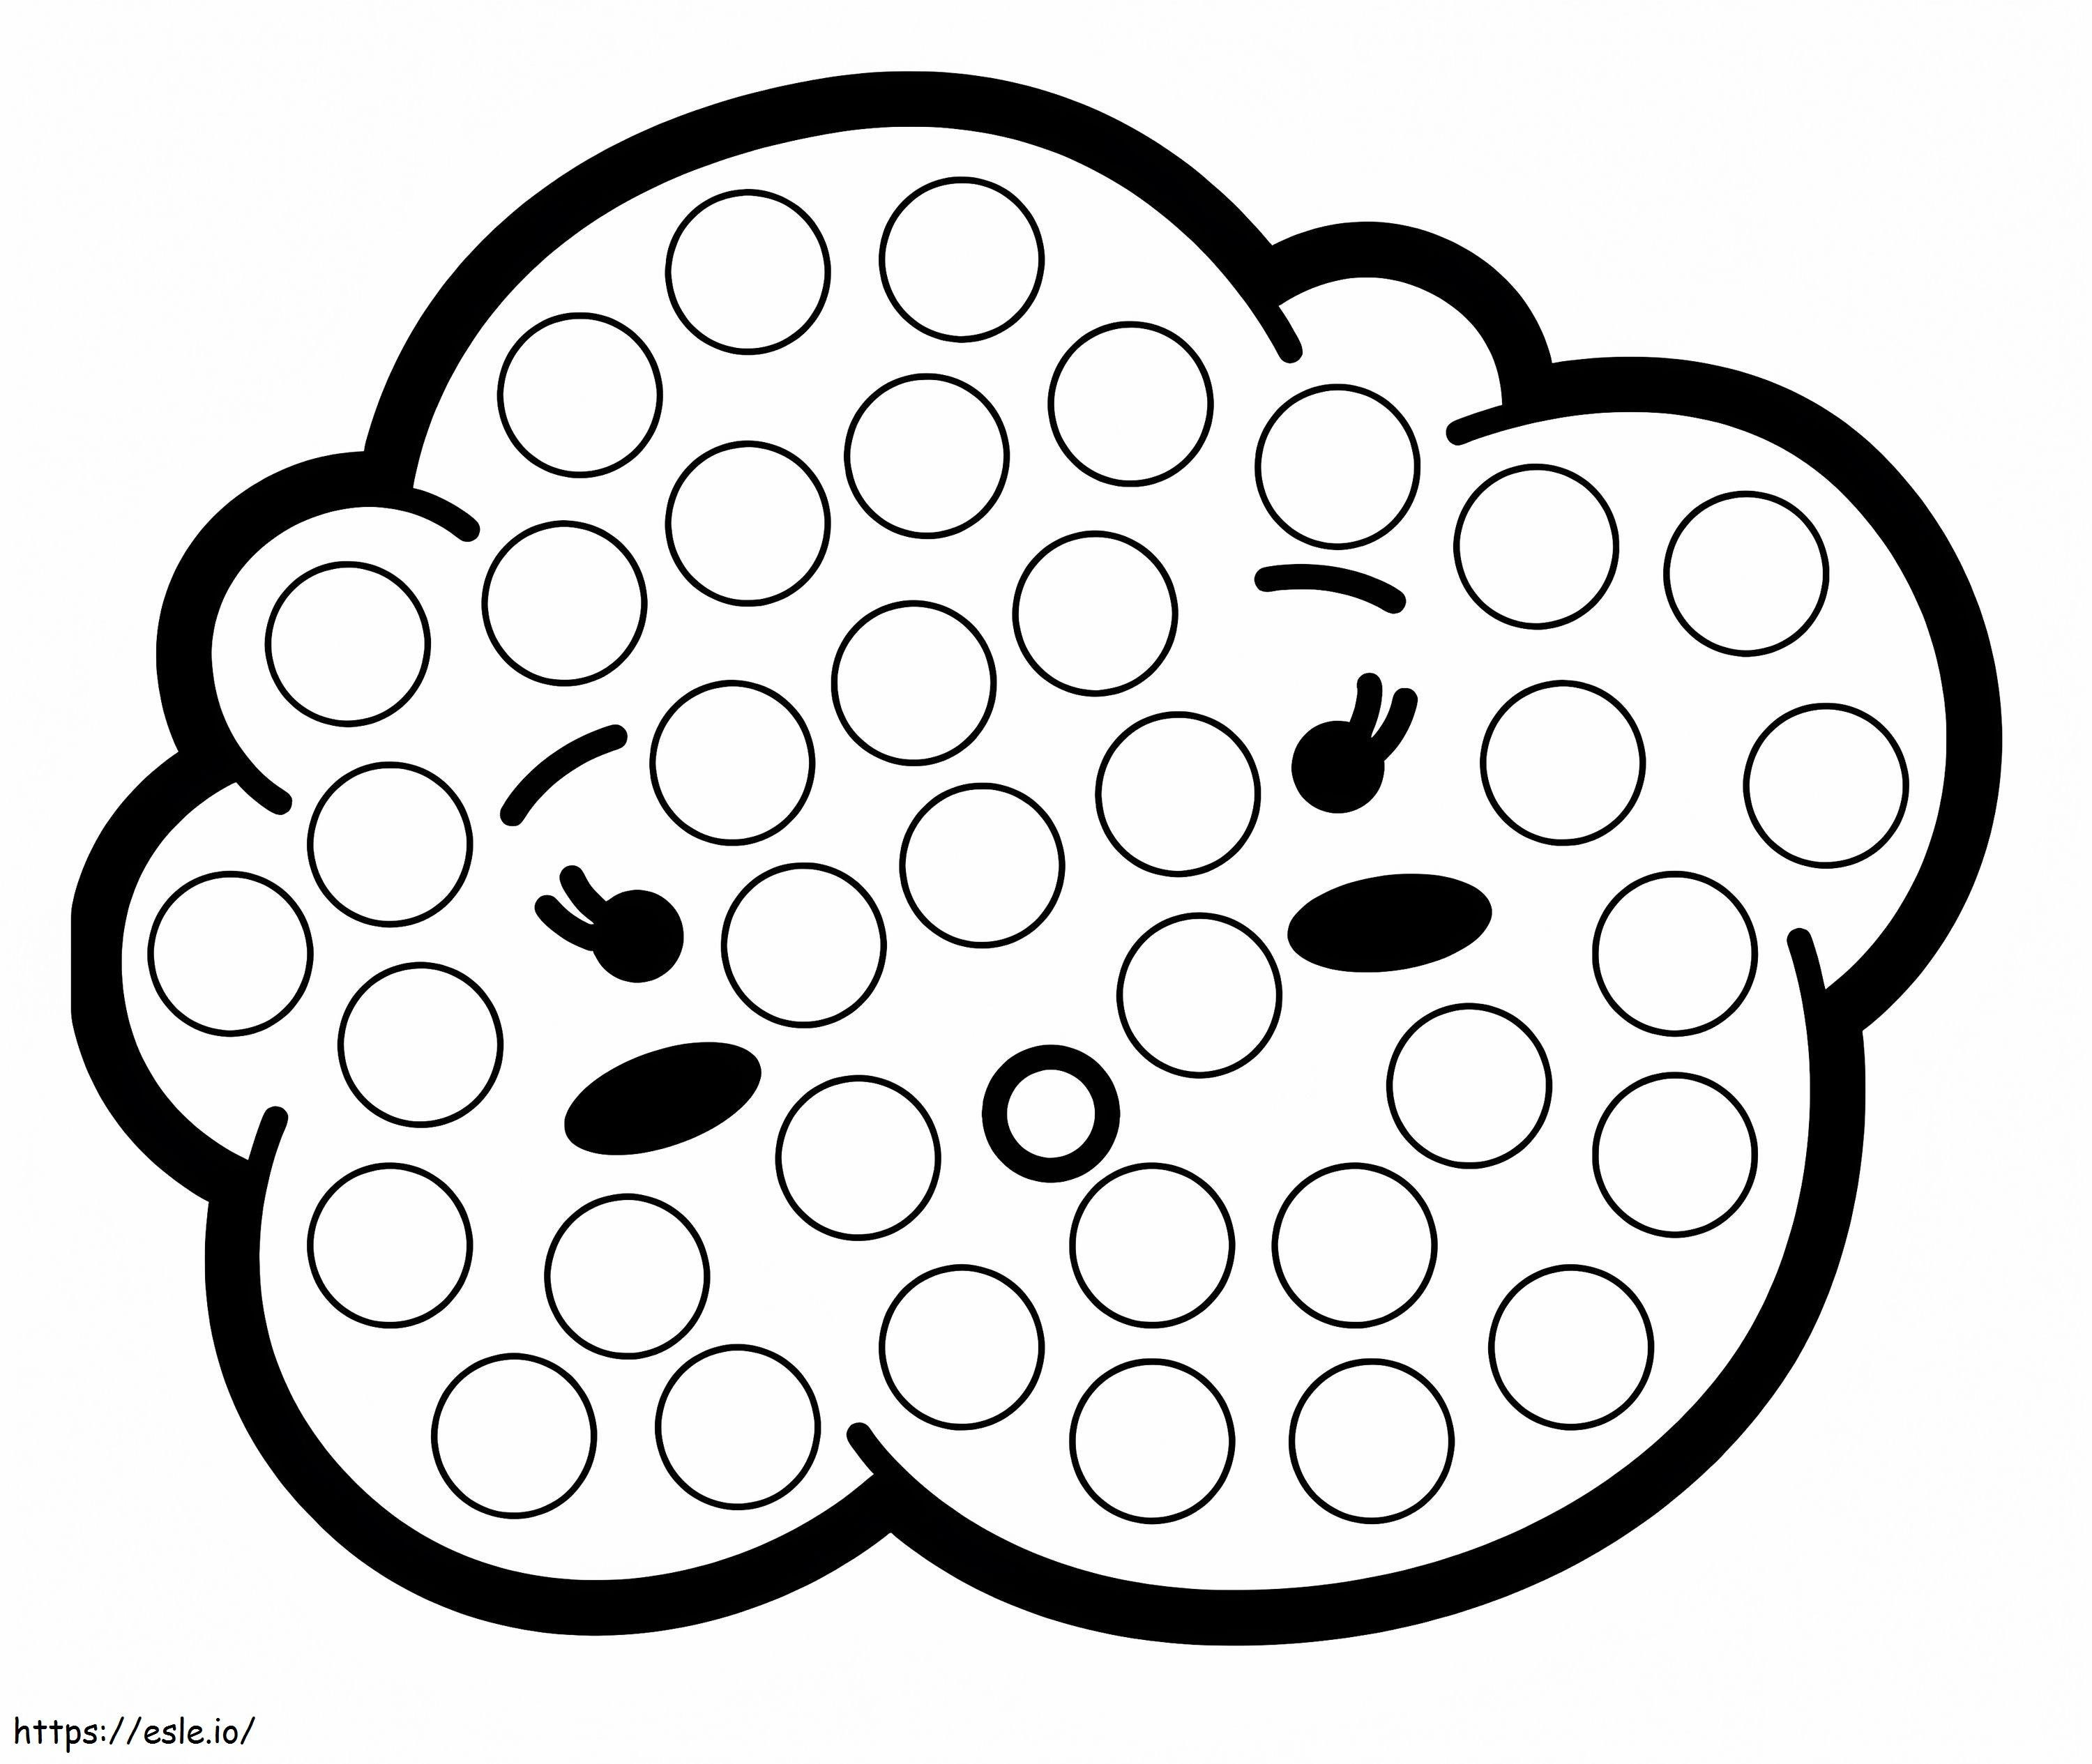 Cloud Dot Marker coloring page